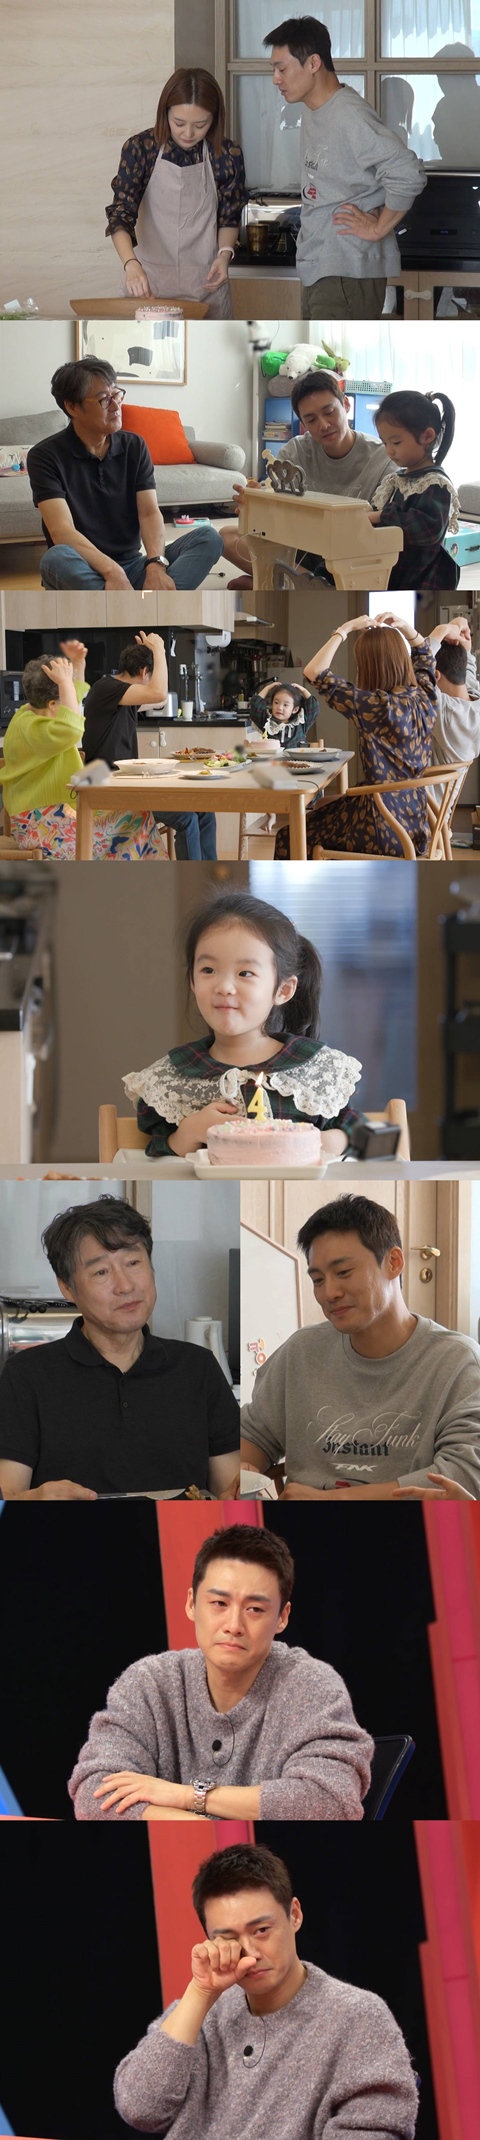 Oh Sang-jin, Kim So-young couple hold daughter SuAs birthday partyOn the 24th, SBS Same Bed, Different Dreams 2: You Are My Dest - You Are My Destiny, Oh Sang-jin and Kim So-young attracted attention from the morning.In celebration of her daughter SuAs birthday, the couple decided to set up a birthday party. In particular, Kim So-young has ambitiously made a birthday cake, saying, I liked bread and got a certificate of baking skill.However, Oh Sang-jin said to his wifes Cake, It seems to be made at home, Amateurism Cake and Notice Zero stone fastball, and Kim So-youngs fraud, which he expected to praise, was broken in one room.It is the back door that even the MCs who watched the appearance of Oh Sang-jin who packs the pack without worrying about the expression of Kim So-young who became cold are breathing.On the other hand, Oh Sang-jin surprised everyone by making a shocking remark about his father. Oh Sang-jins parents also celebrated his granddaughters birthday.Oh Sang-jins father boasted Oh Sang-jin and Doppelganger class synchro rate from appearance to personality, and made the studio sullen from appearance.Oh Sang-jin said, I respect my father the most in the world, but there is also an antipathy in it. Oh Sang-jins story will be released for the first time on the air.On the other hand, Oh Sang-jin was curious about the sudden tears during the studio recording. Oh Sang-jin, who was watching the video, was unable to speak to the appearance of an unexpected person.Lee Ji-hye and Lee Hyun-yi, who watched Oh Sang-jins tears, are also said to have become tears. I wonder what happened to Oh Sang-jin.11:10 p.m. tonight.